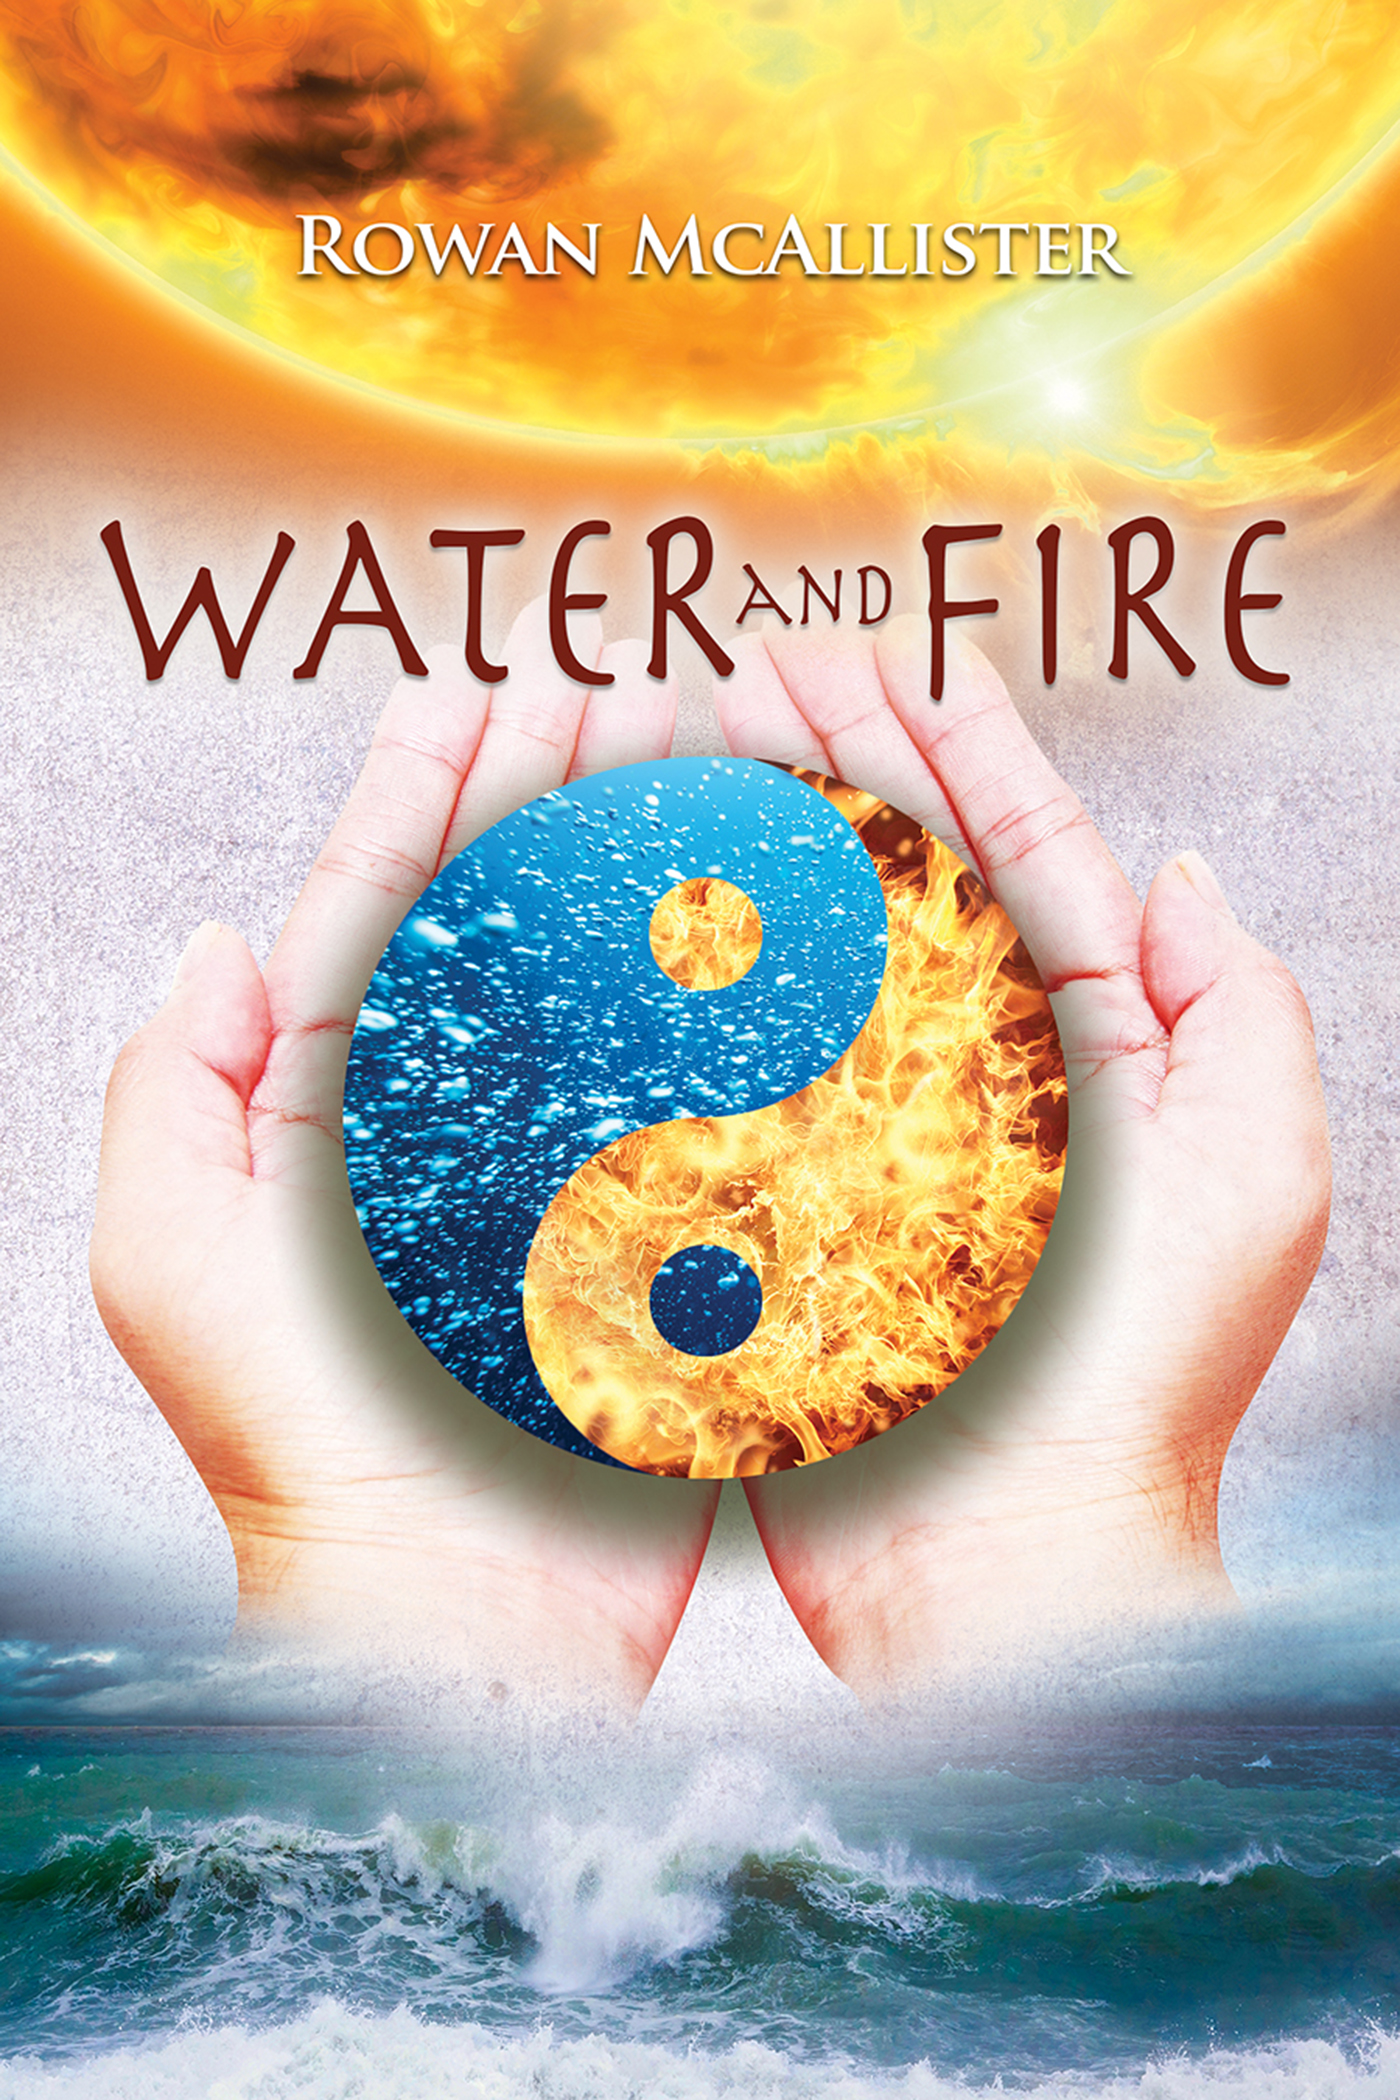 This image is the cover for the book Water and Fire, Elemental Harmony